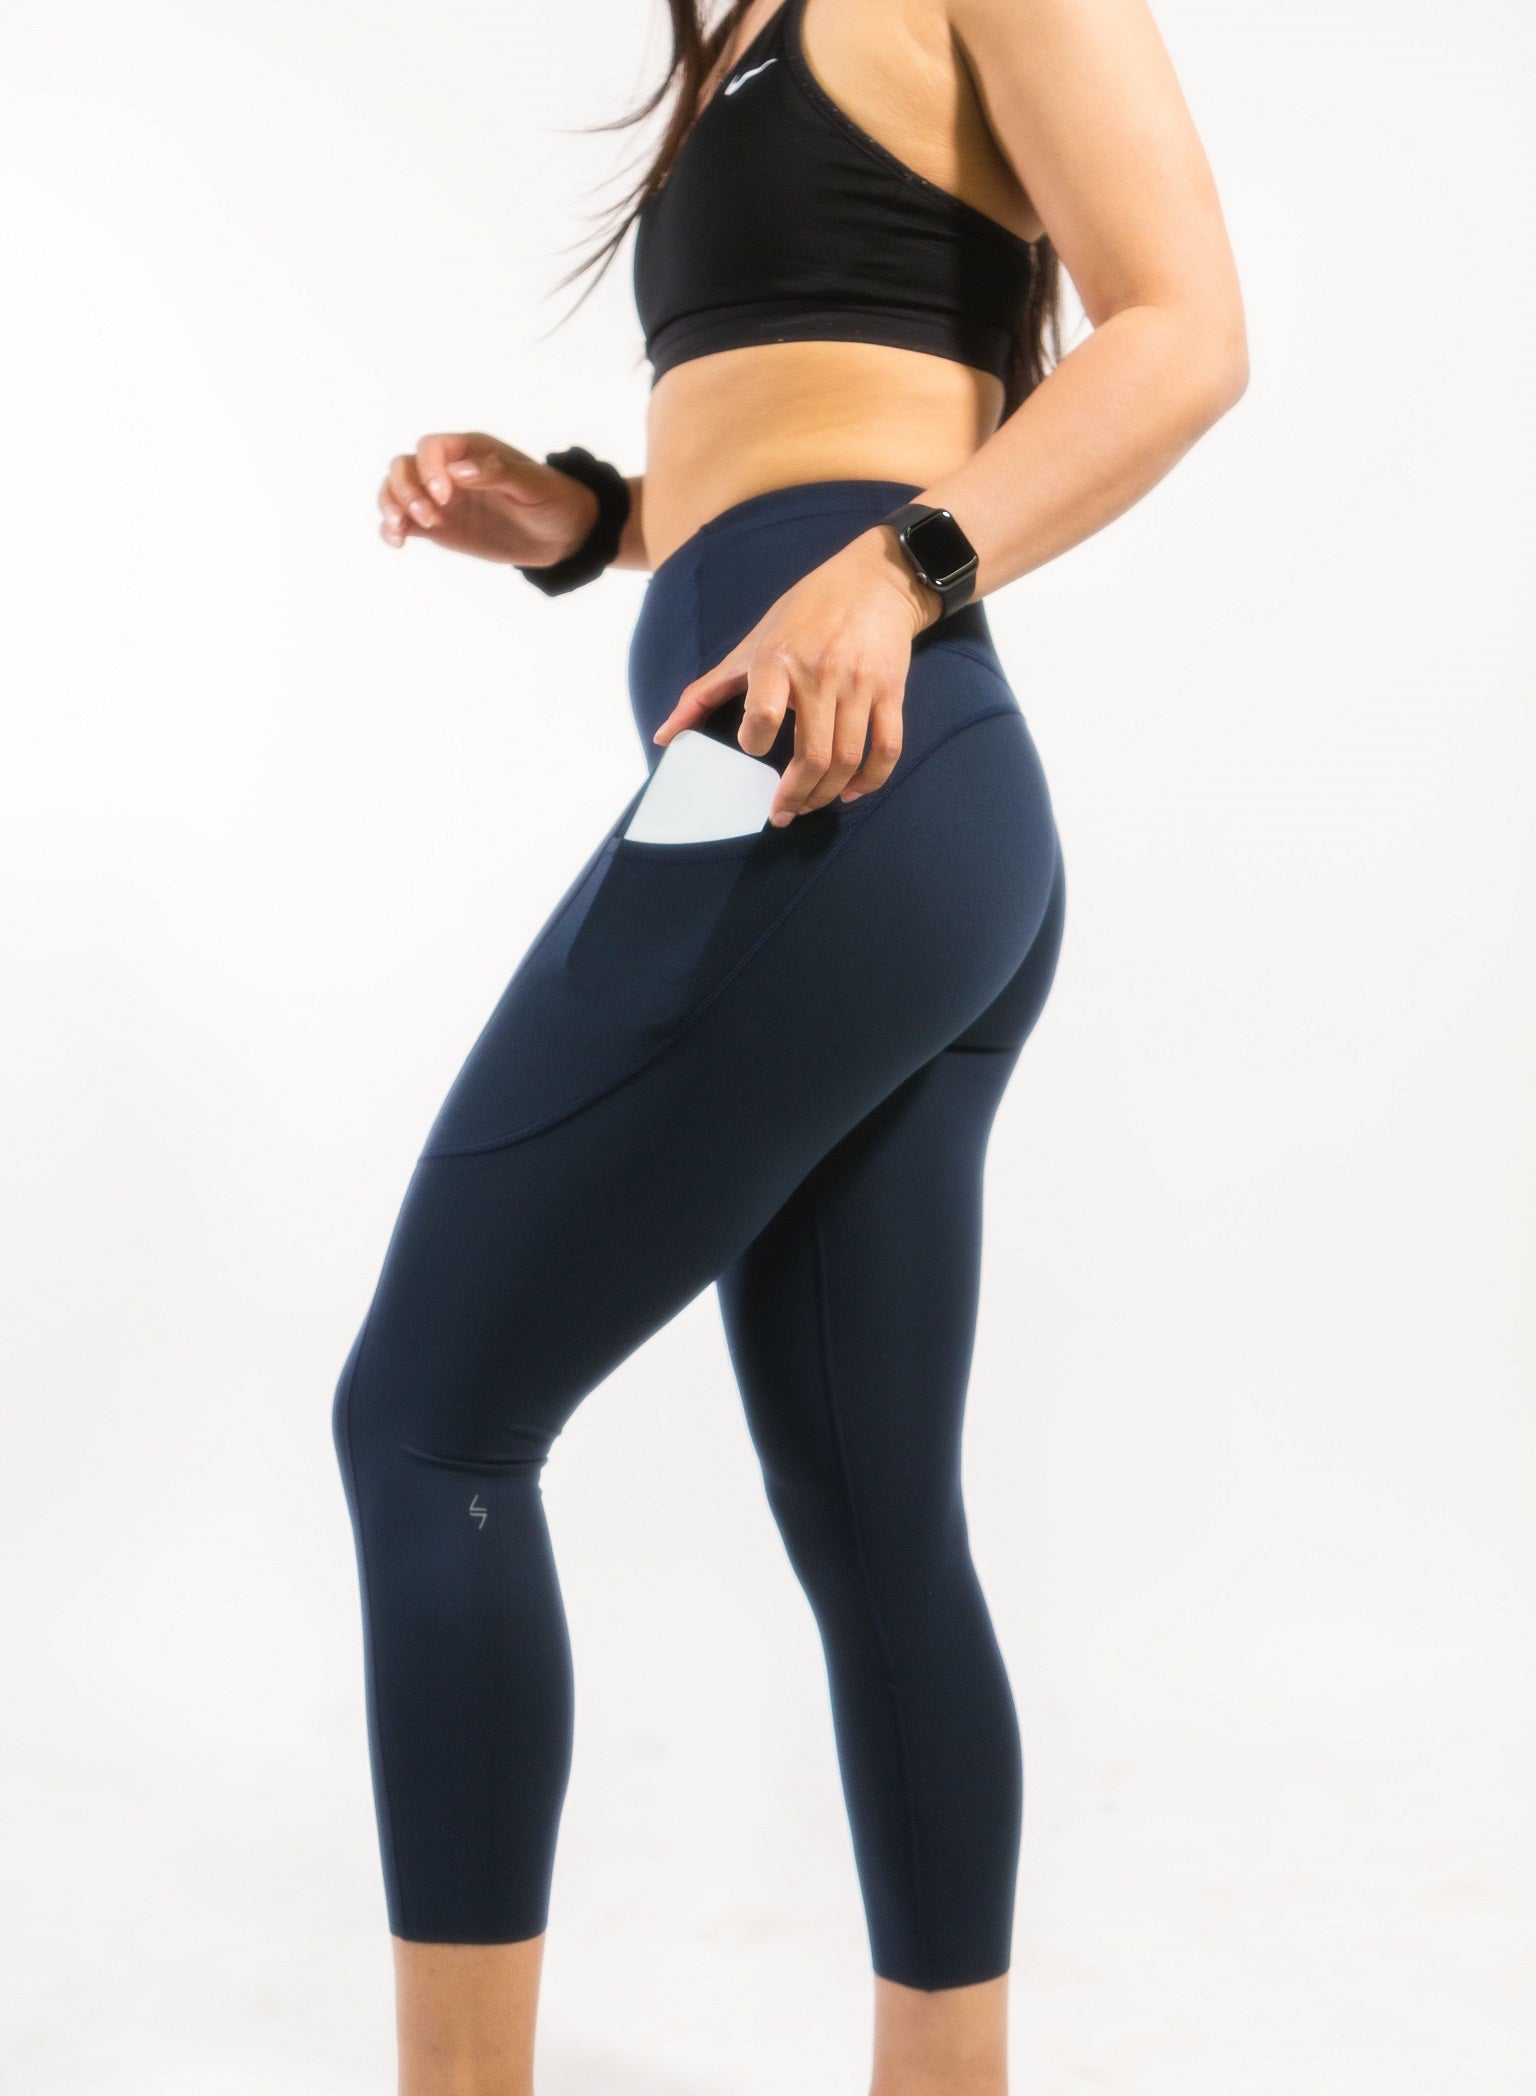 Shield of Faith Black Leggings with Cross Emblem - Comfy Workout